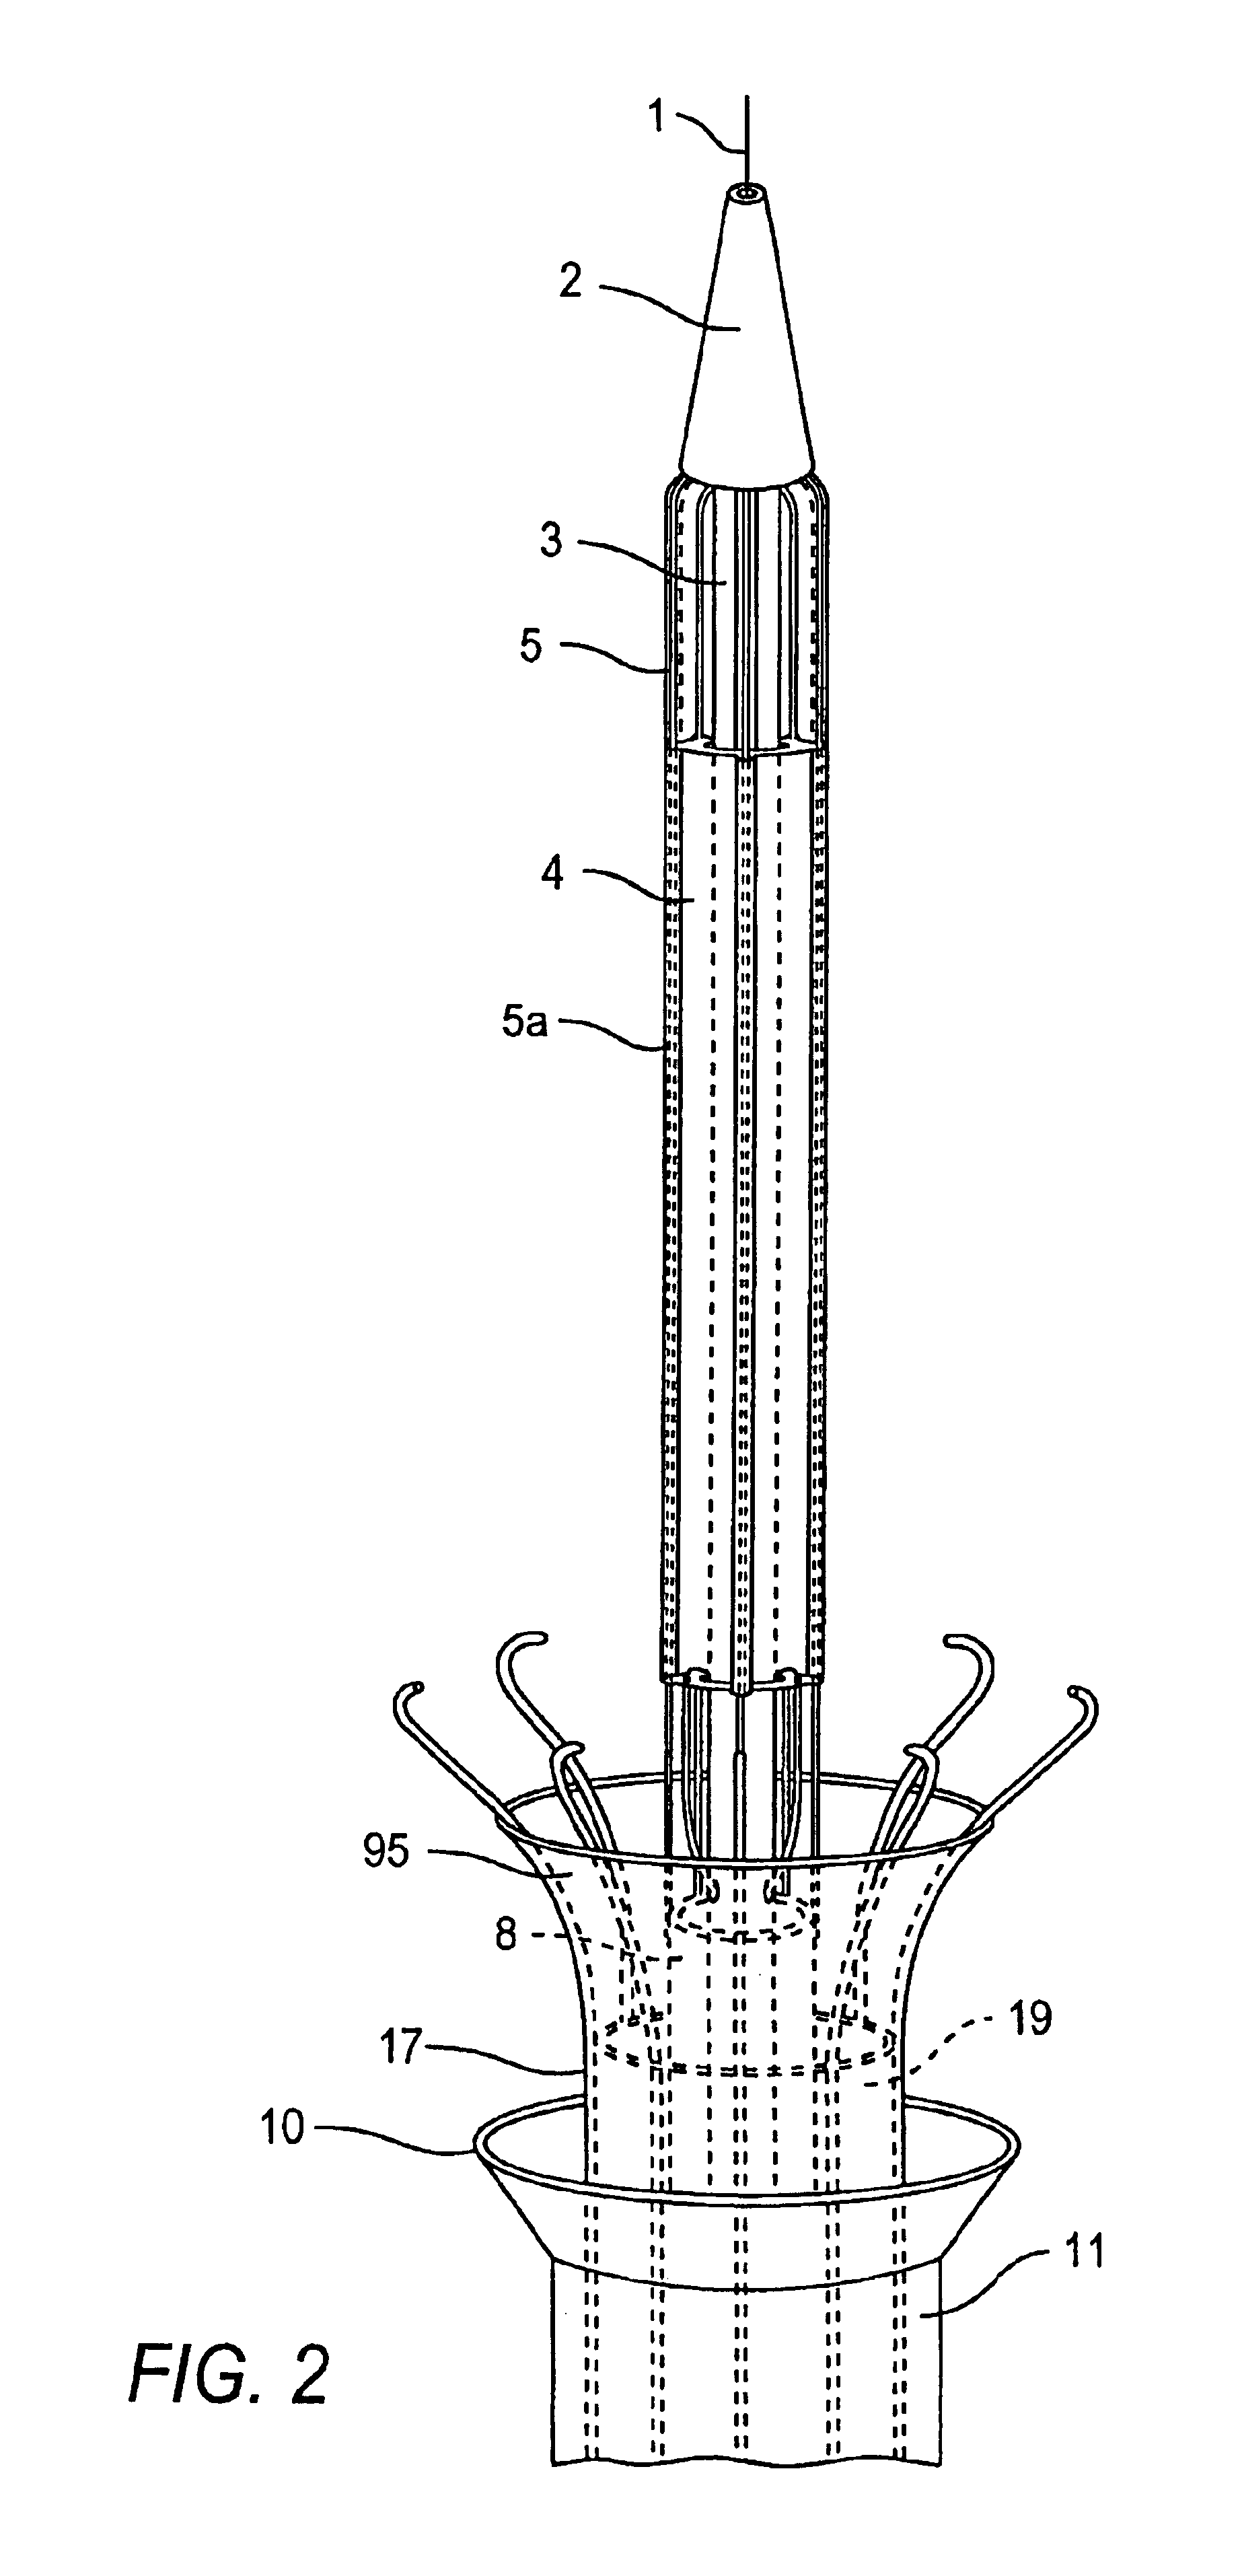 Methods for delivering, repositioning and/or retrieving self-expanding stents